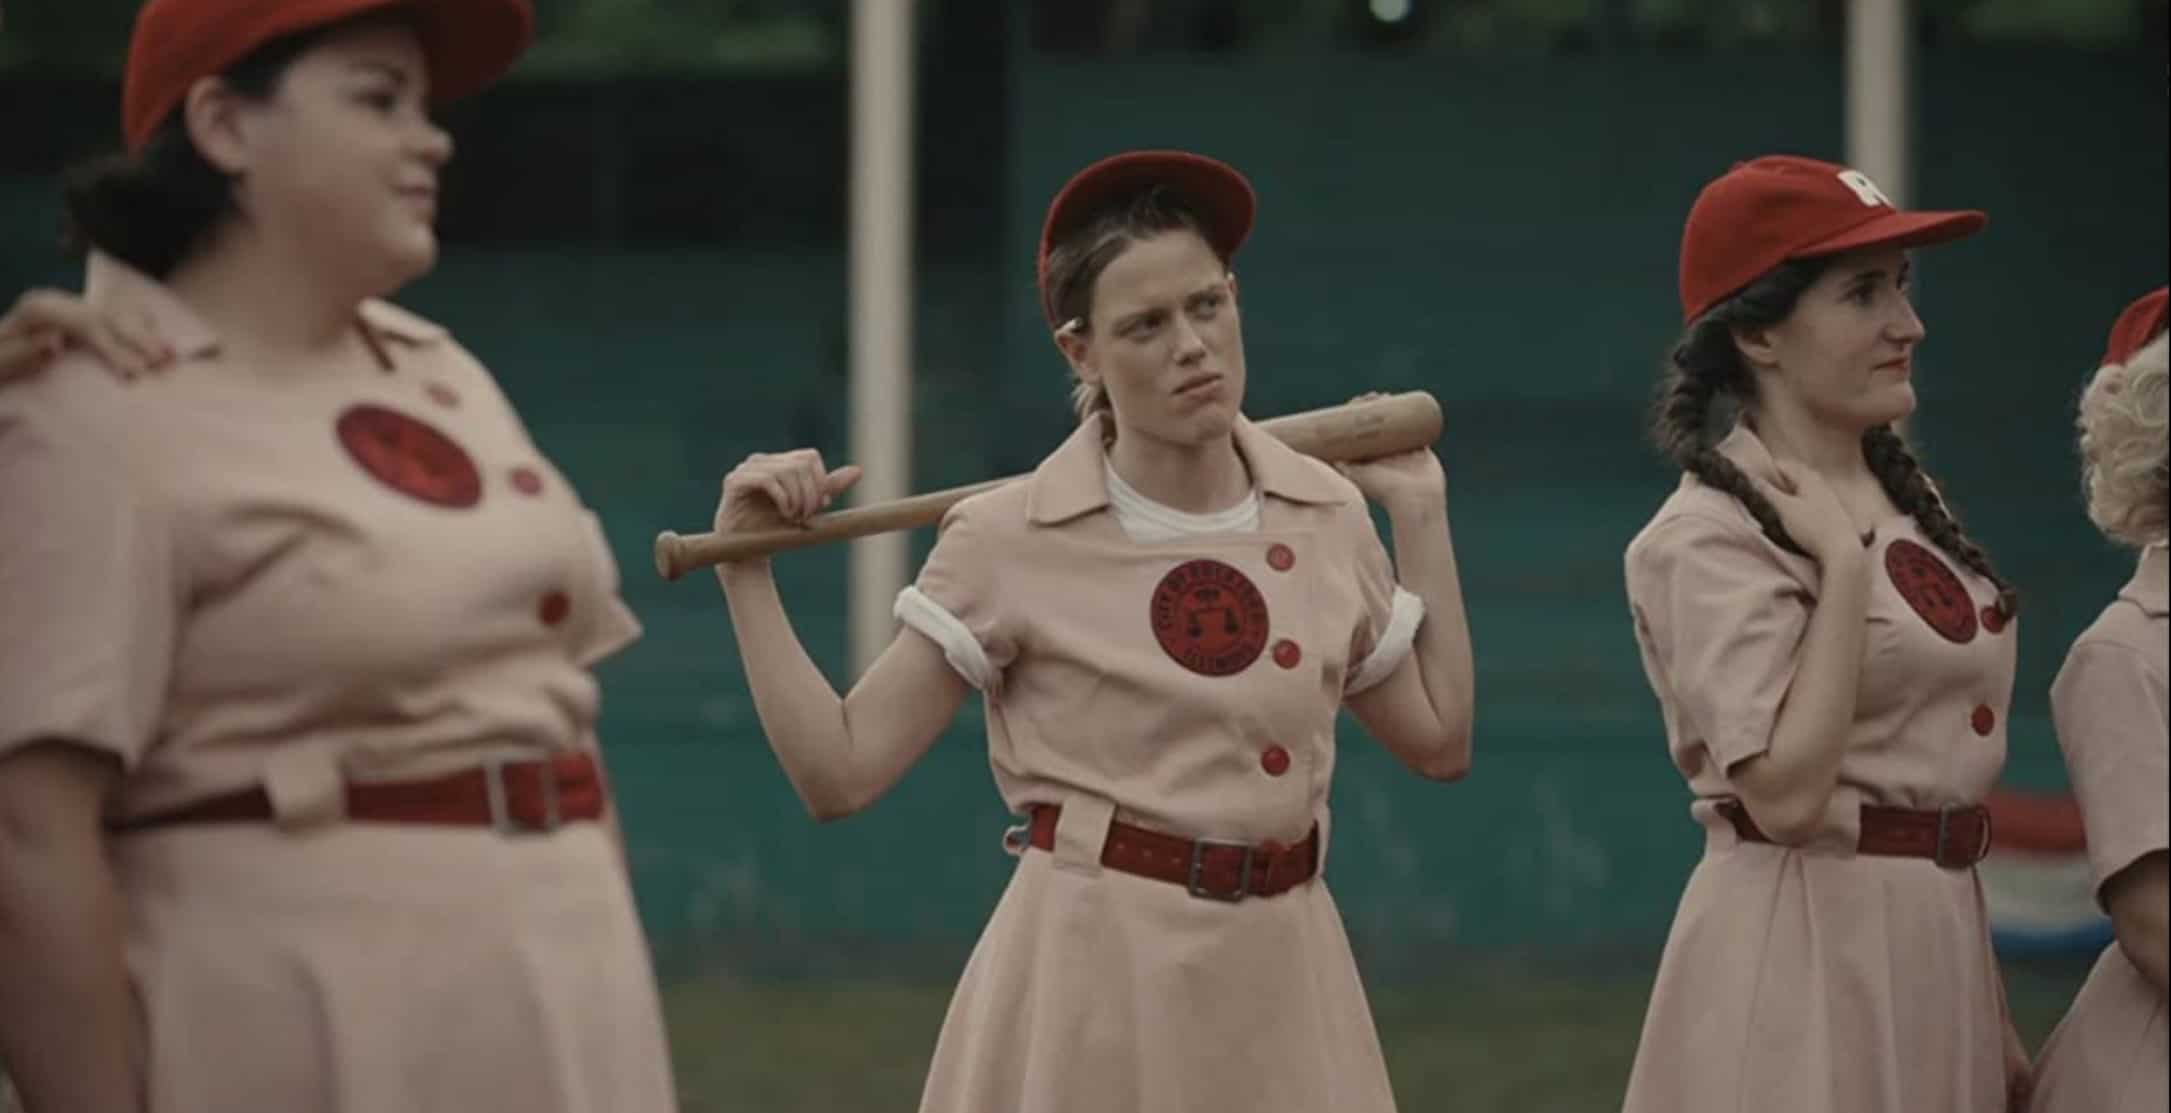 “A League of Their Own” on Amazon Prime Video